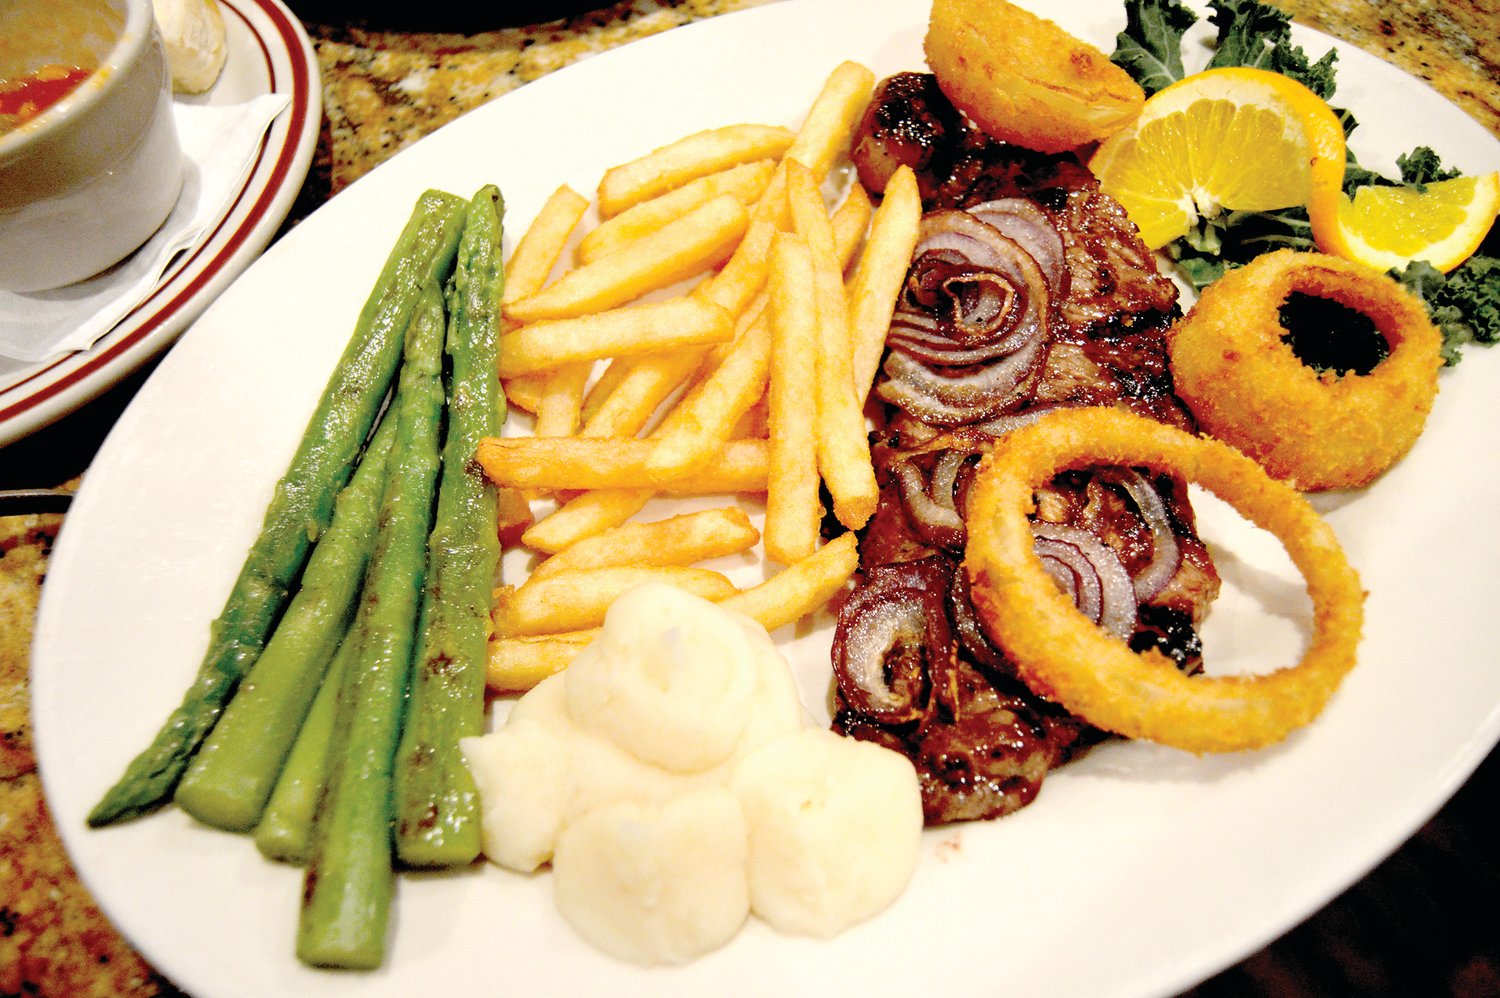 A New York strip steak is topped with onions and onion rings at the New Hope Star Diner. Photograph by Susan S. Yeske.